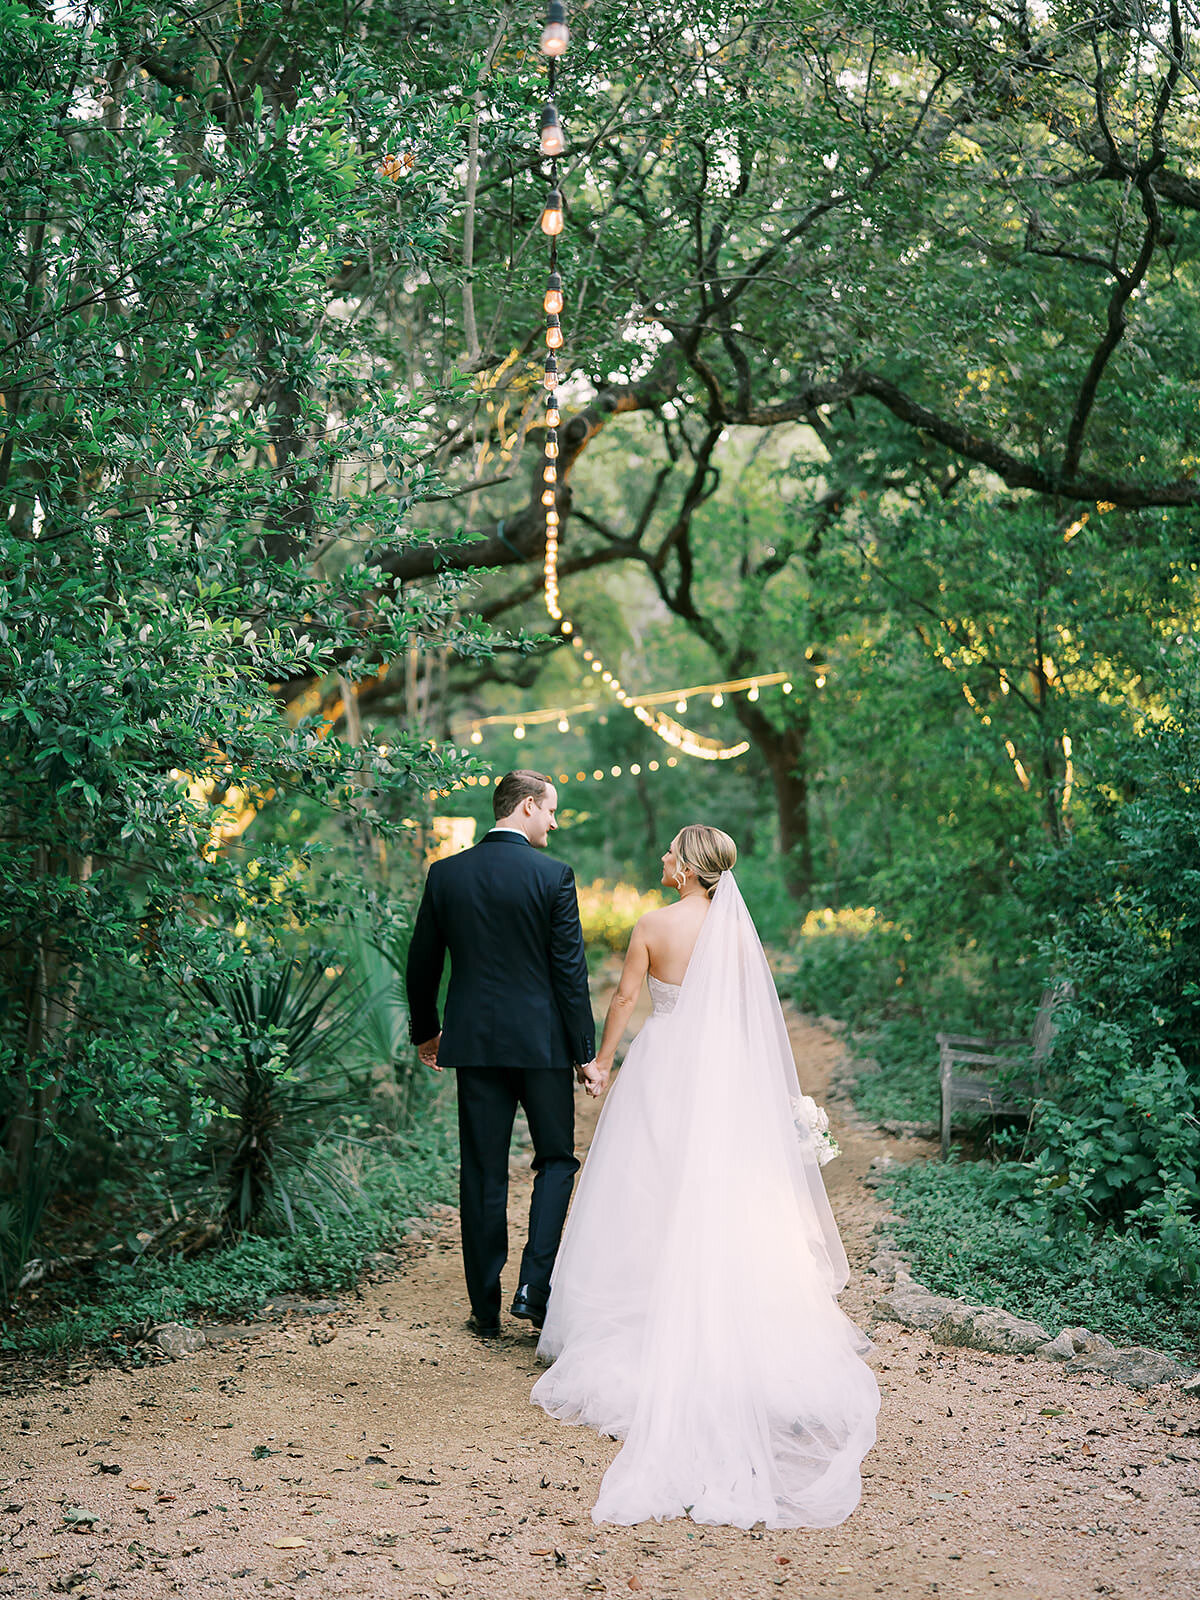 The bride and groom walk together down the nature trails at Laguna Gloria